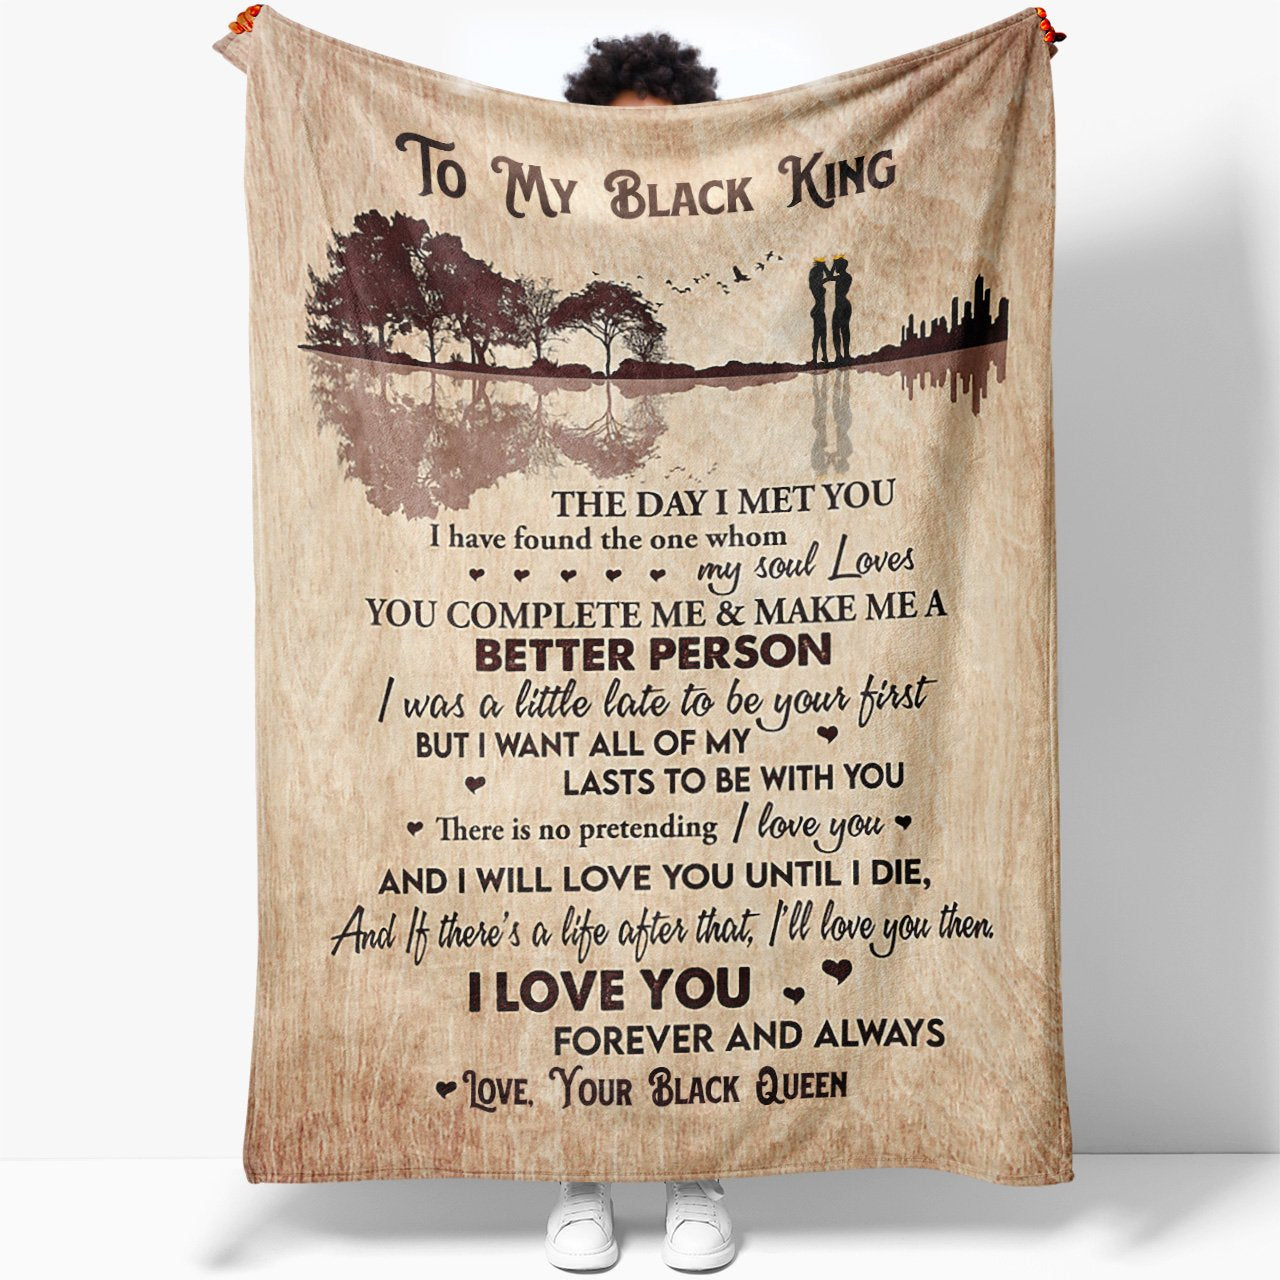 Blanket for Black King Husband, You Complete and Make Me a Better Person Blanket for Him, Thoughtful Romantic Birthday Christmas Gift For Husband Him